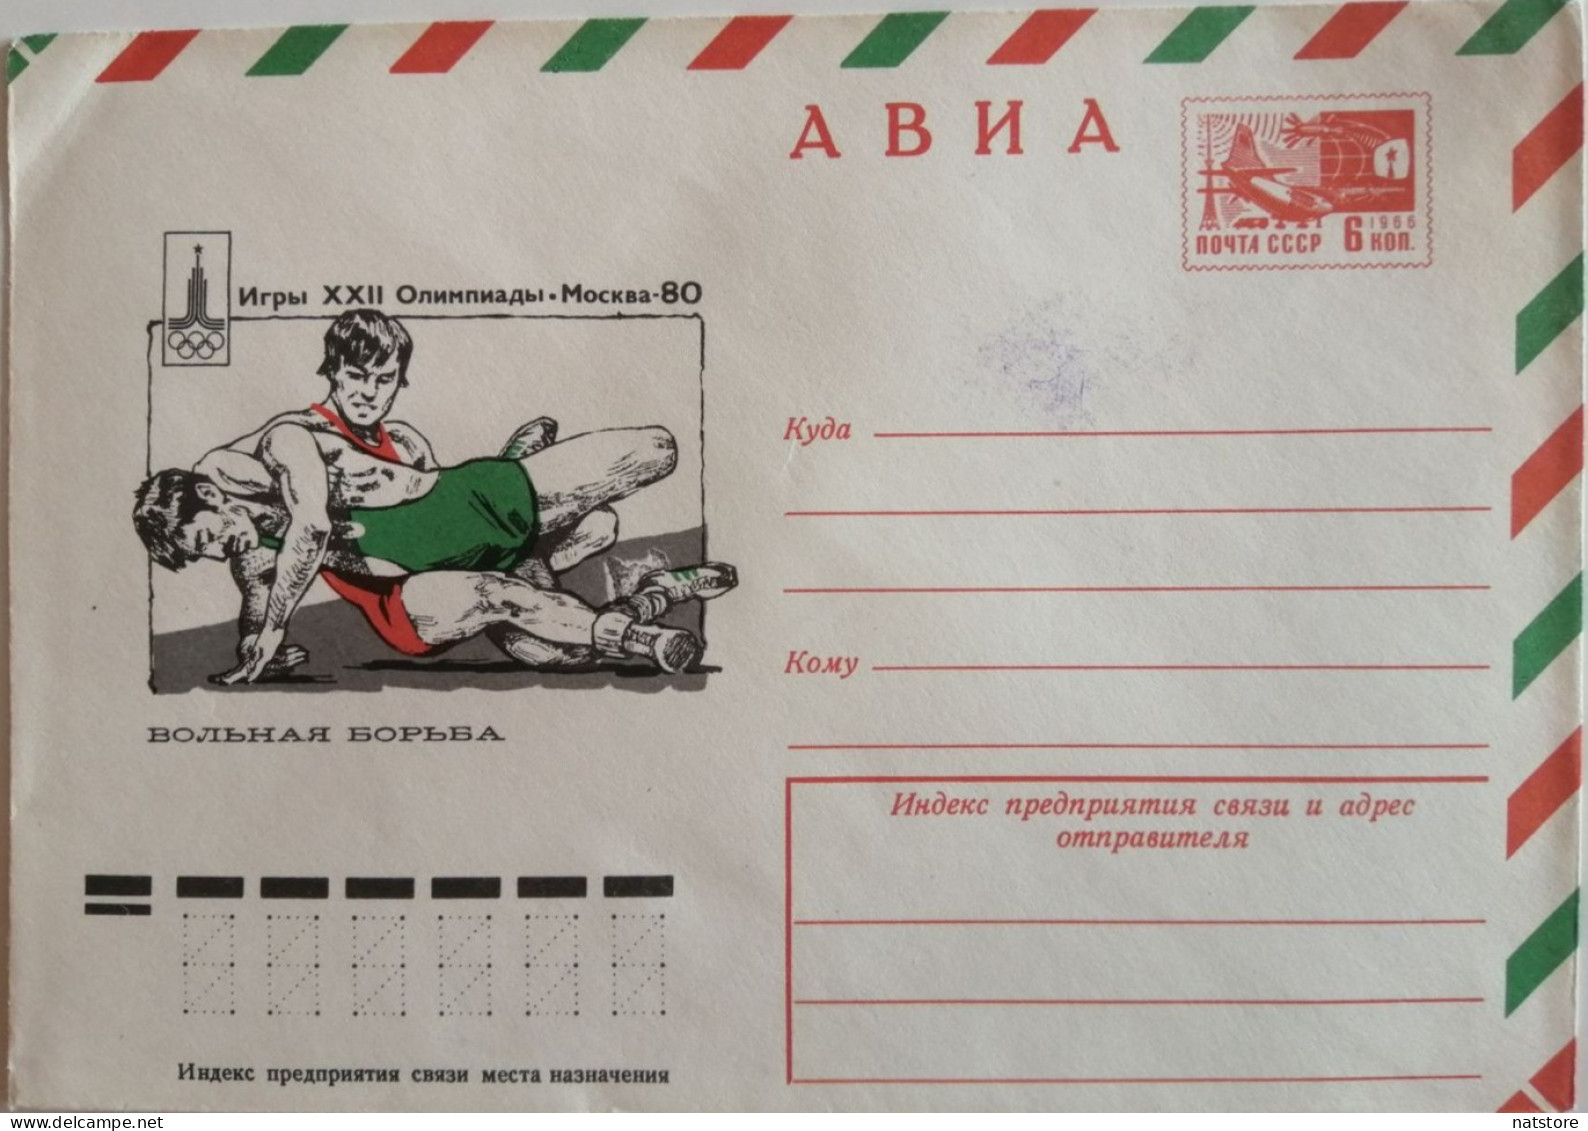 1977..USSR...VINTAGE  COVER WITH STAMP..AVIA ..OLYMPIC GAMES XXII..MOSCOW-80..FREESTYLE WRESTLING - Sommer 1980: Moskau